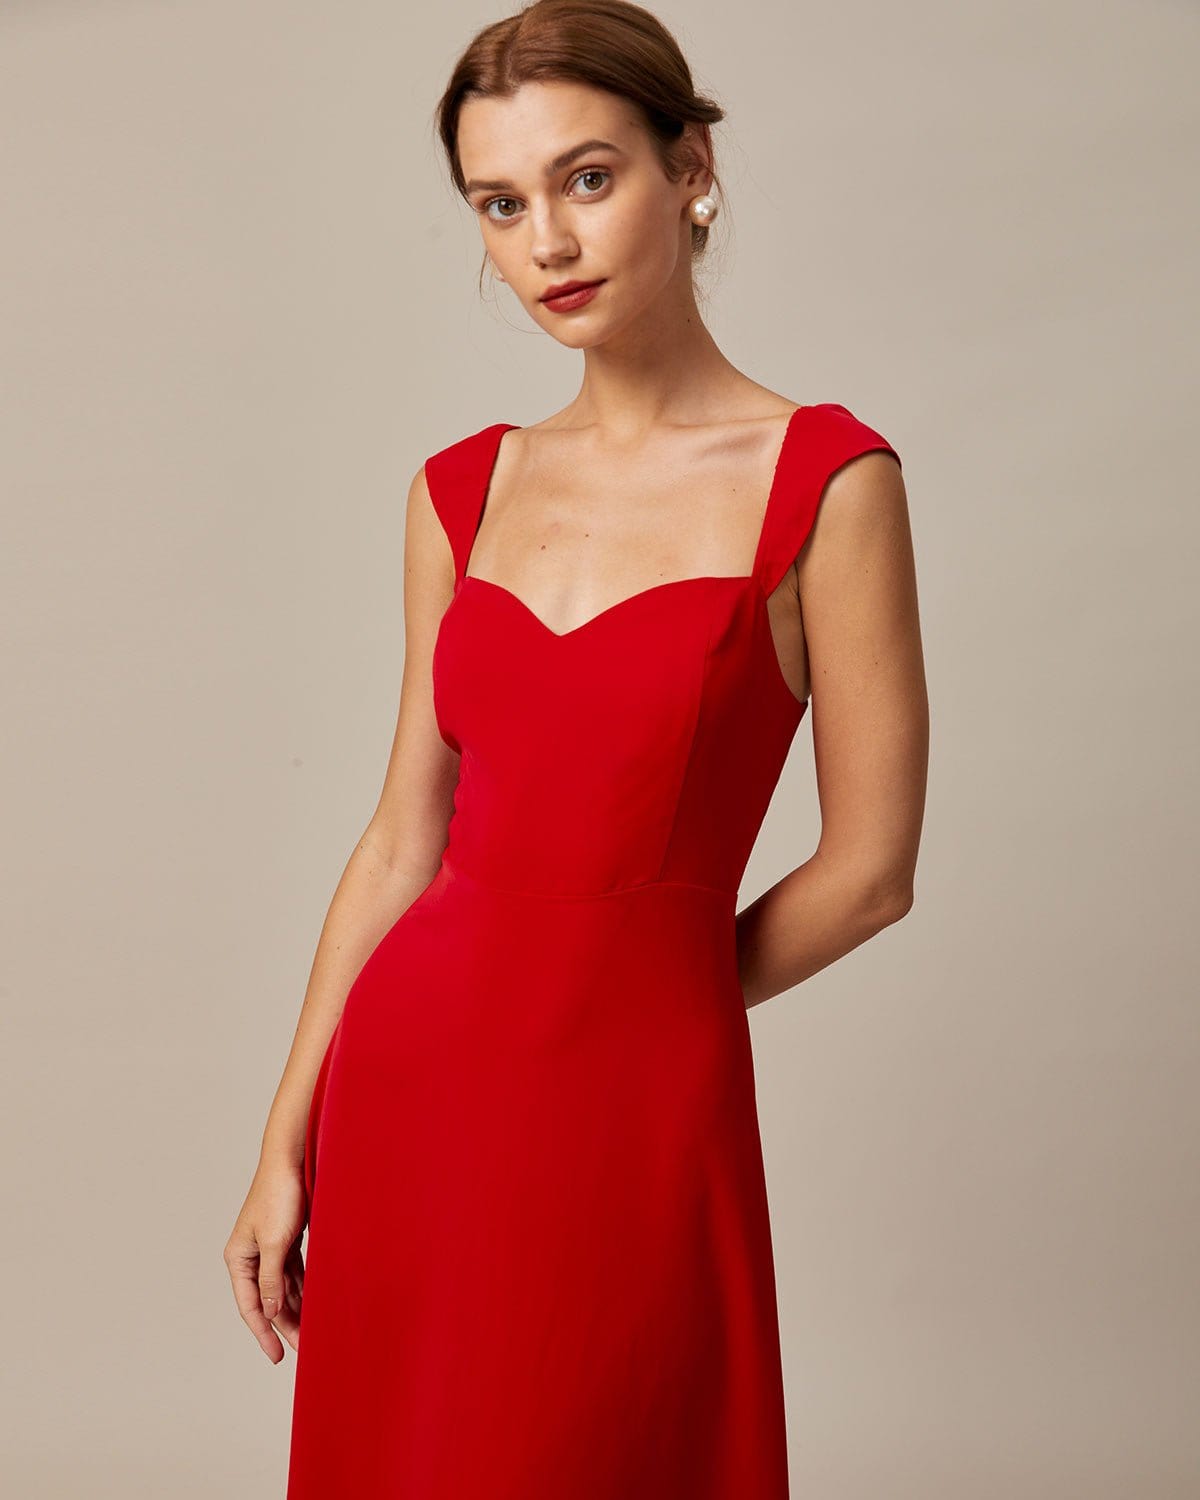 One Piece Red Dress For Woman